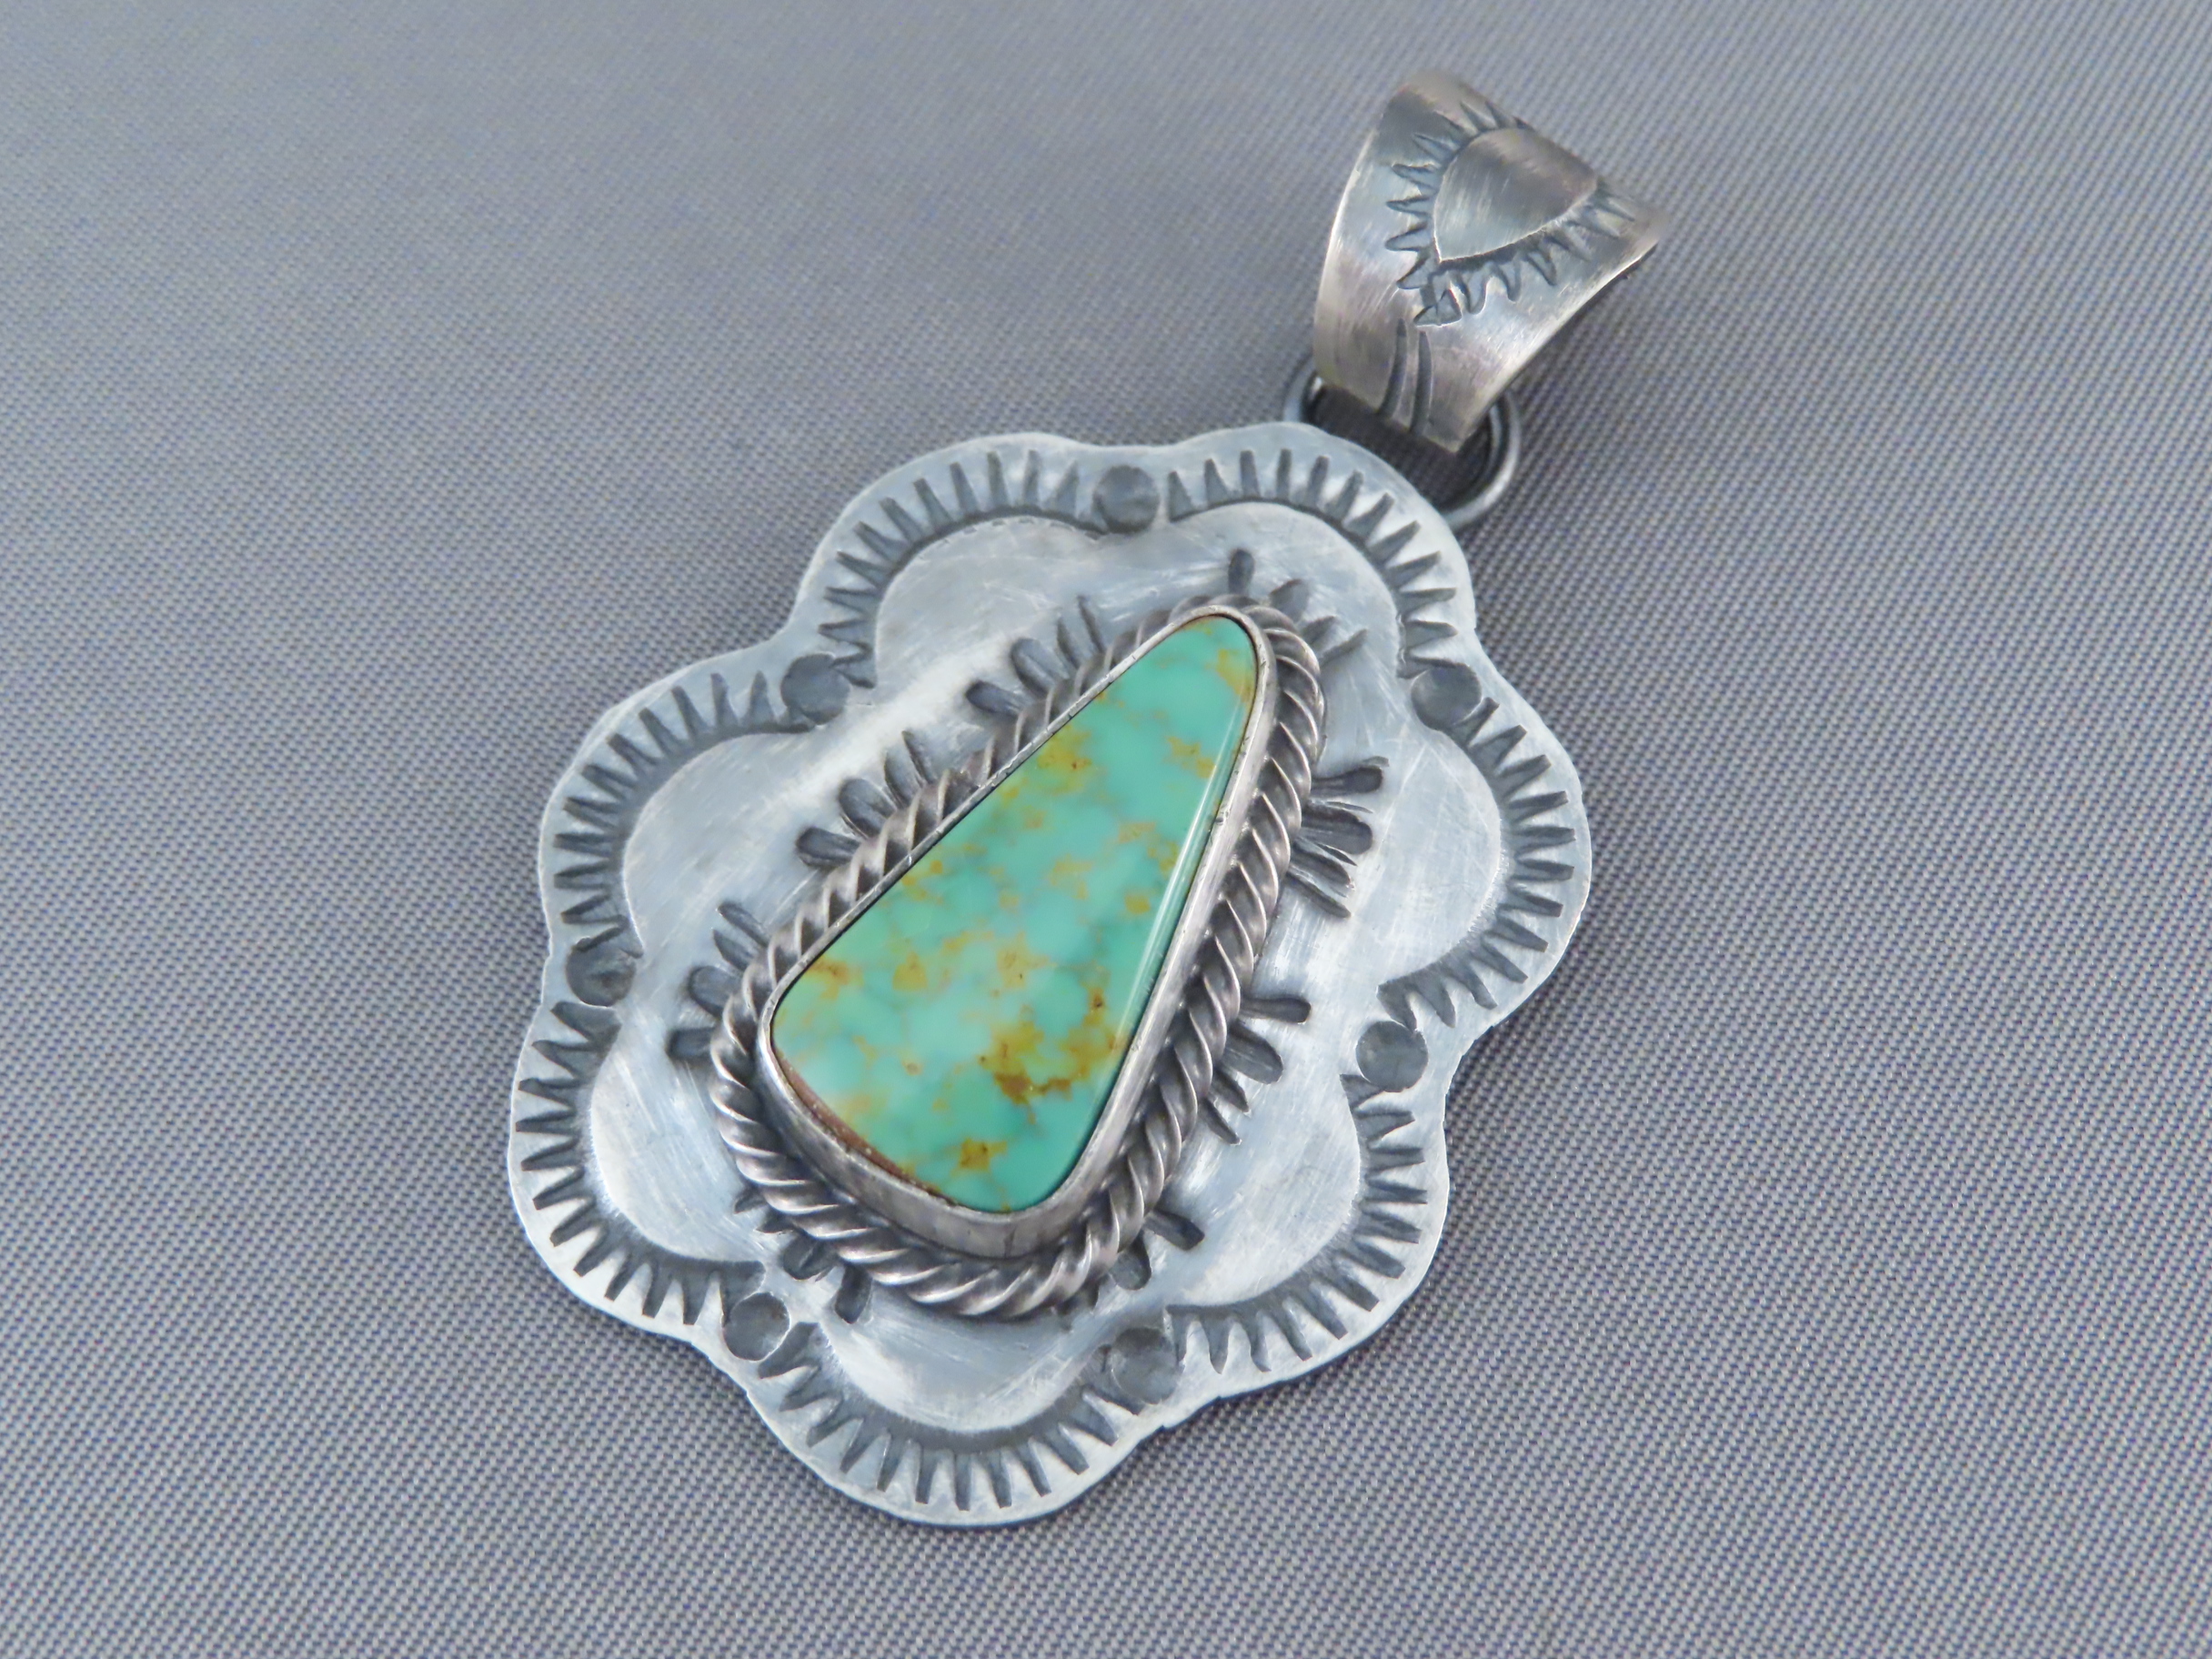 Turquoise Jewelry - Royston Turquoise Pendant by Native American Navajo Indian jeweler, Kathy Yazzie $175- FOR SALE